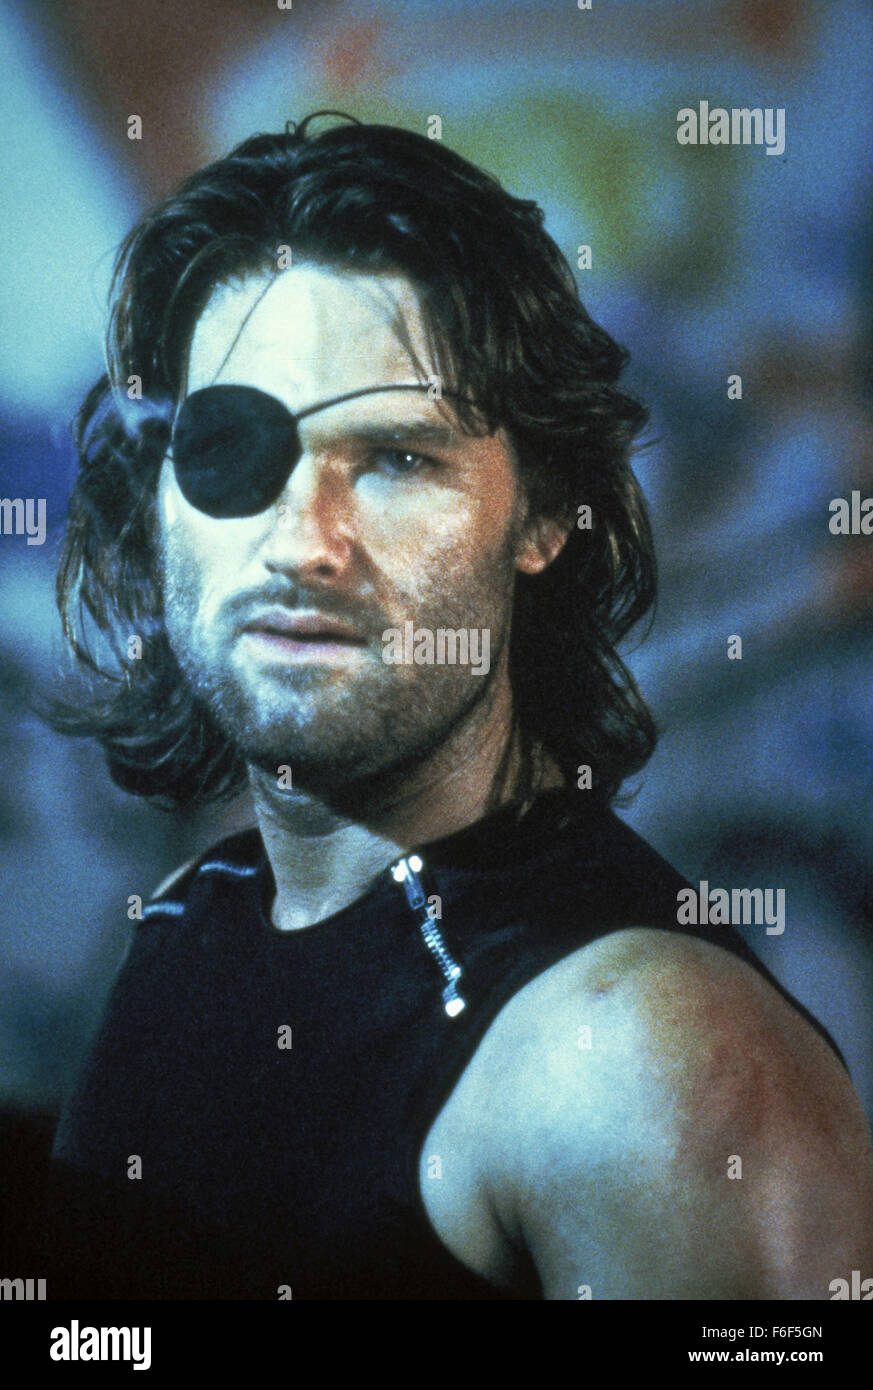 RELEASE DATE: July 10, 1981  MOVIE TITLE: Escape from New York  STUDIO: AVCO Embassy Picture  DIRECTOR: John Carpenter  PLOT: In 1997, when the US President crashes into Manhattan, now a giant max. security prison, a convicted bank robber is sent in for a rescue  PICTURED: KURT RUSSELL stars as Snake Plissken  (Credit Image: c AVCO Embassy Picture/Entertainment Pictures) Stock Photo